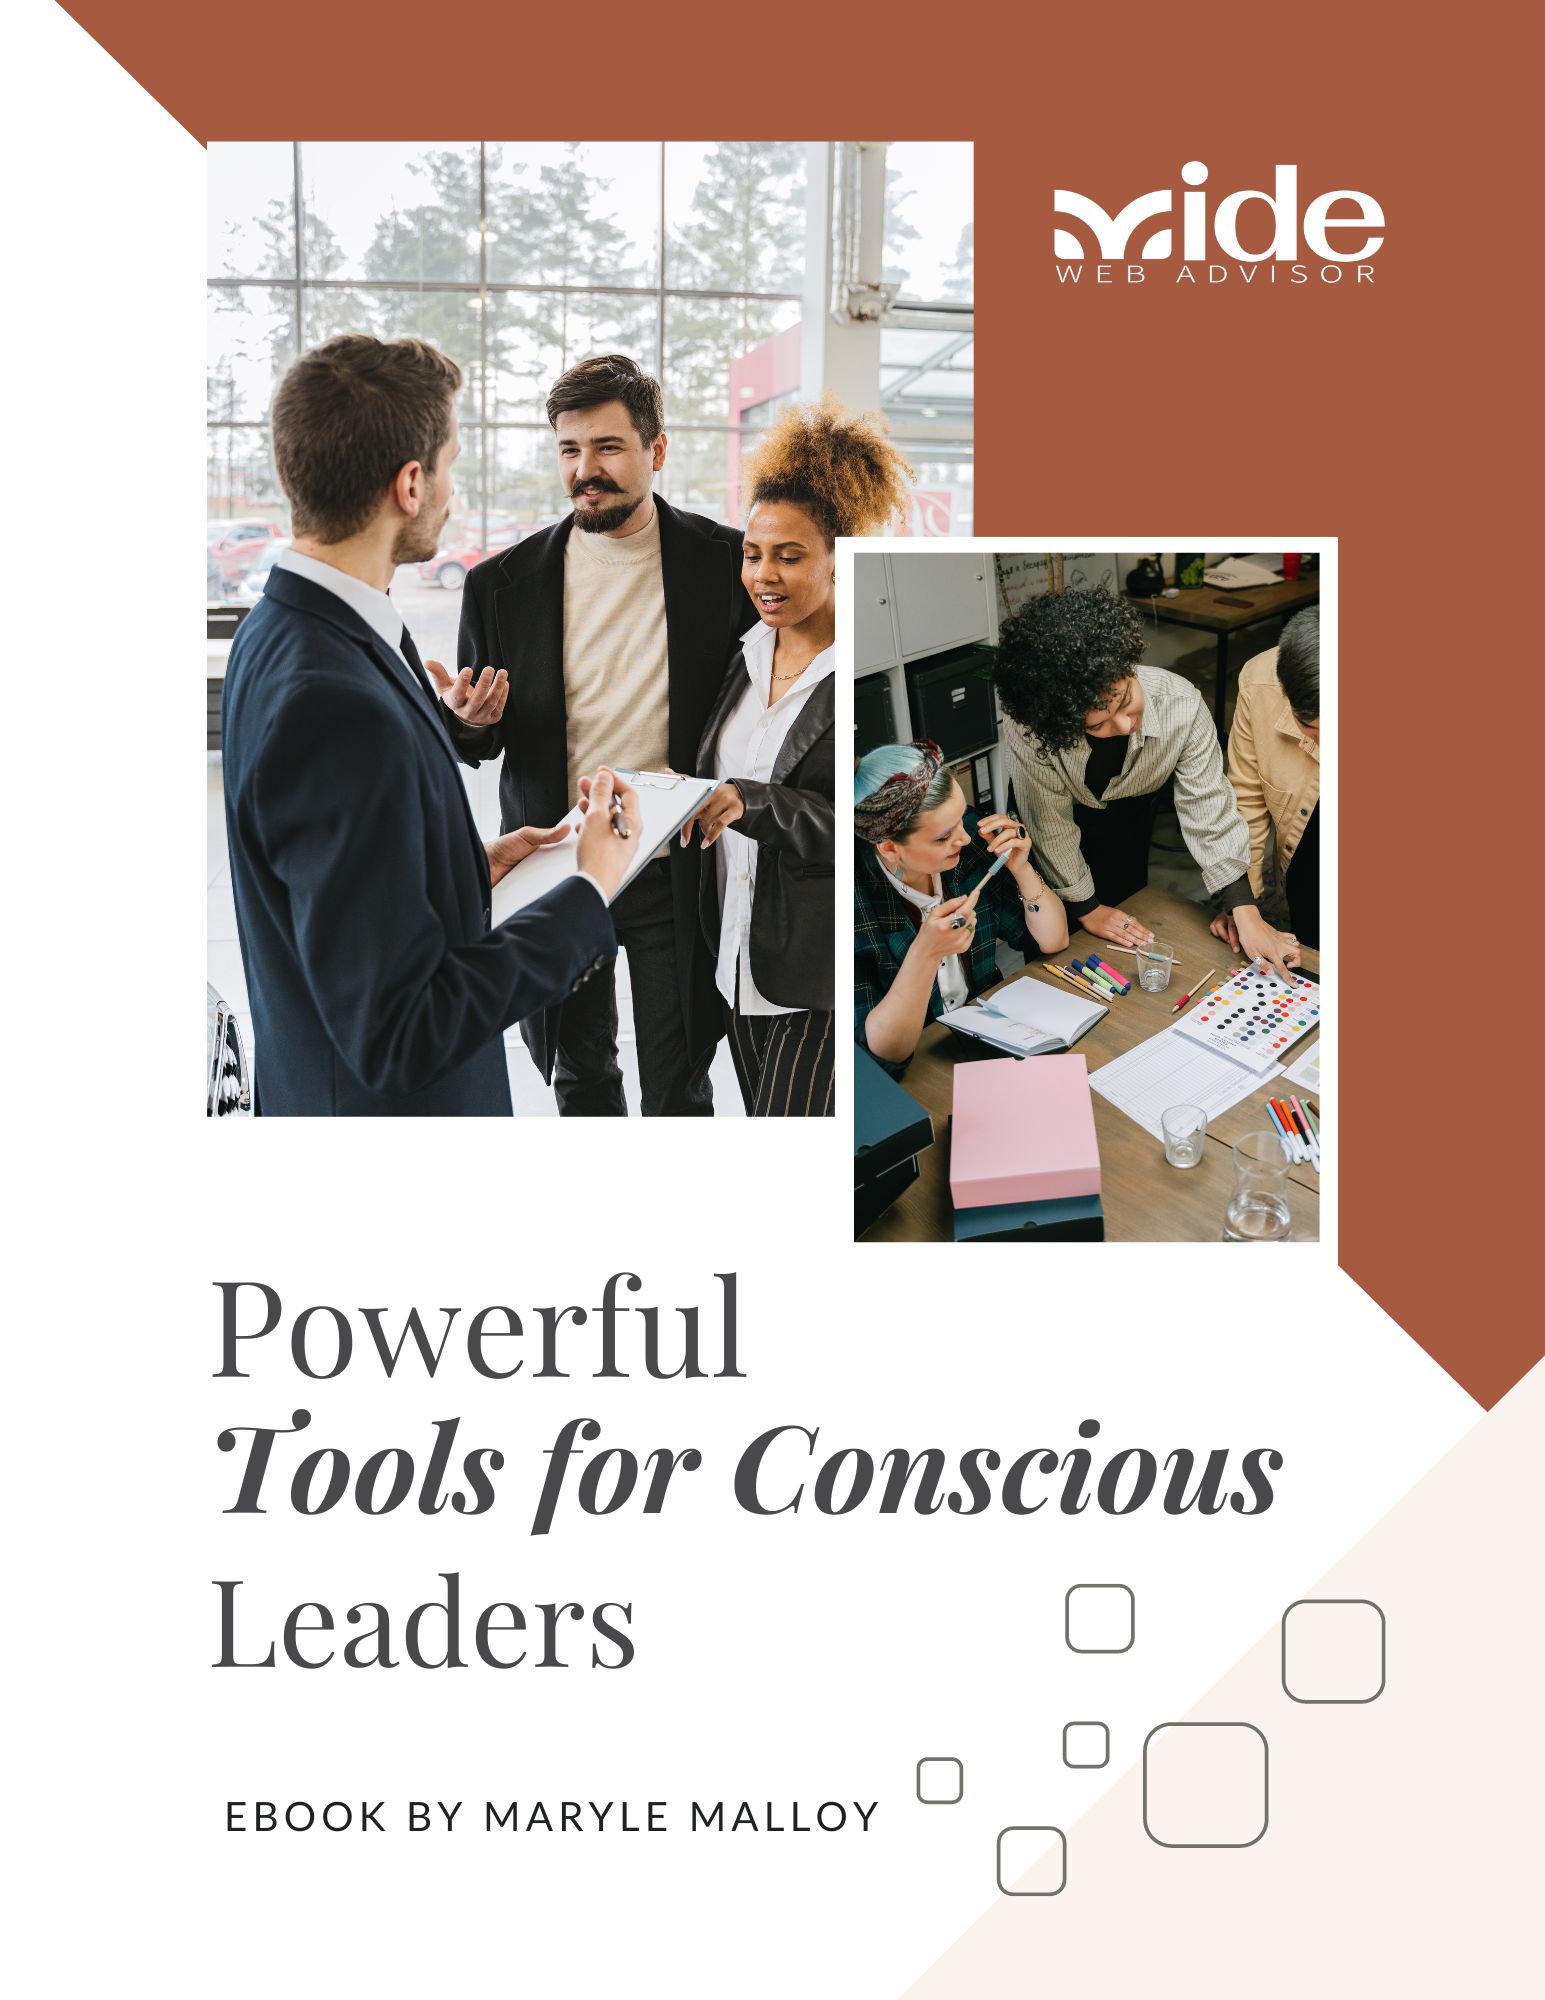 Cover for eBook Powerful Tools for Conscious Leaders. Two pictures with business people talking to each other.